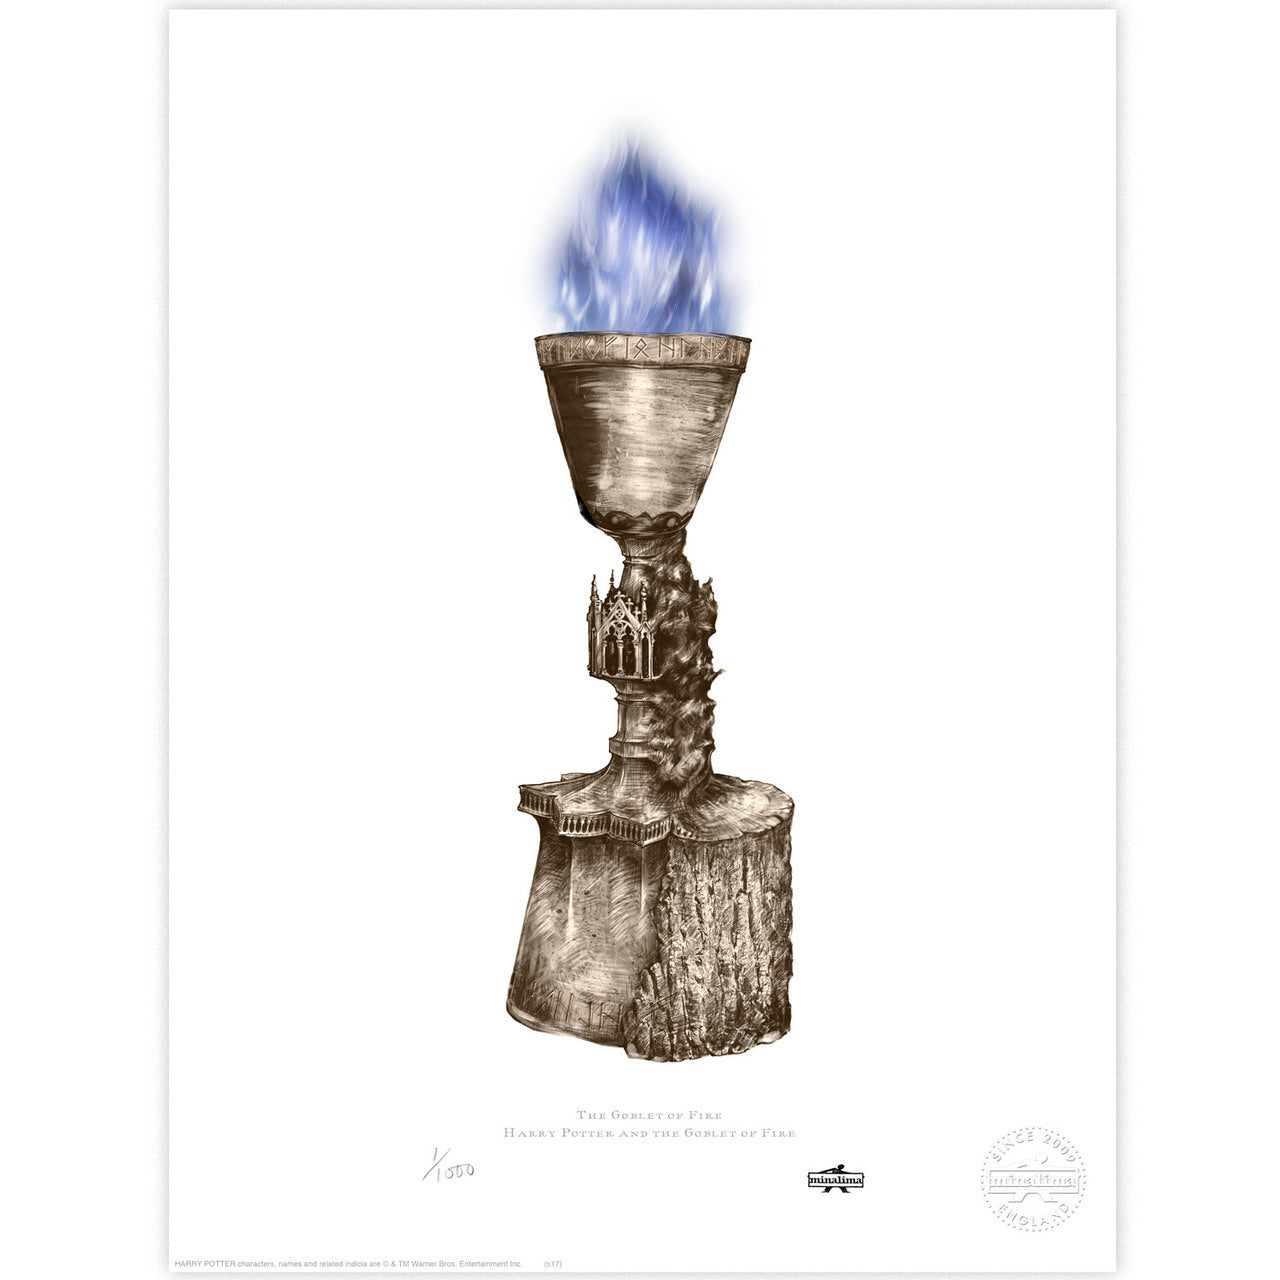 The Goblet of Fire Limited Edition Art Print